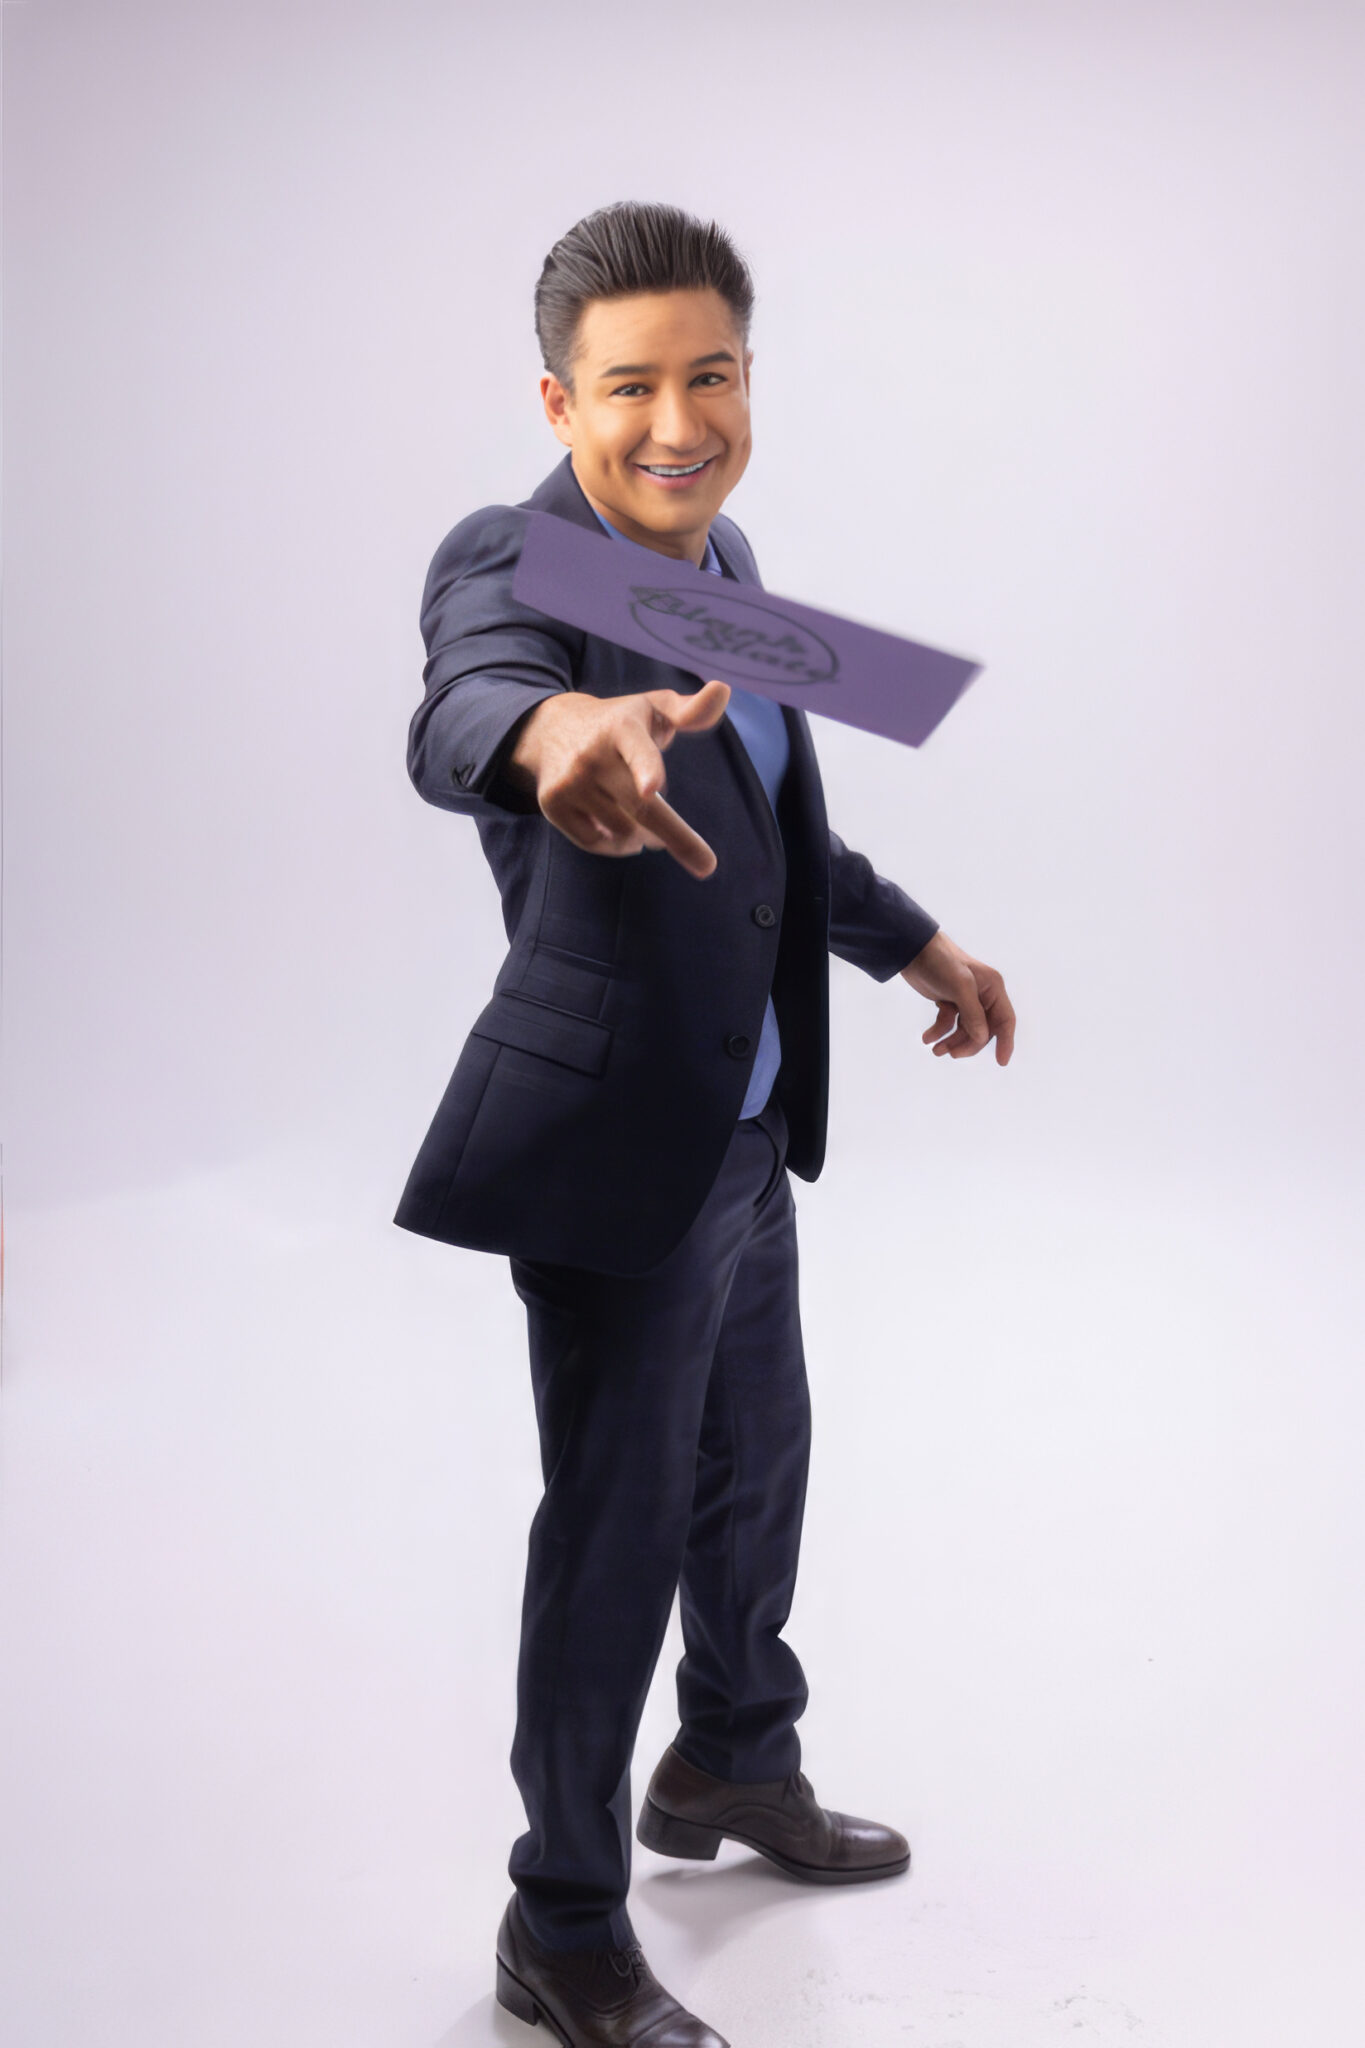 Mario Lopez to Host New Game Show ‘Blank Slate’ Coming to GSN